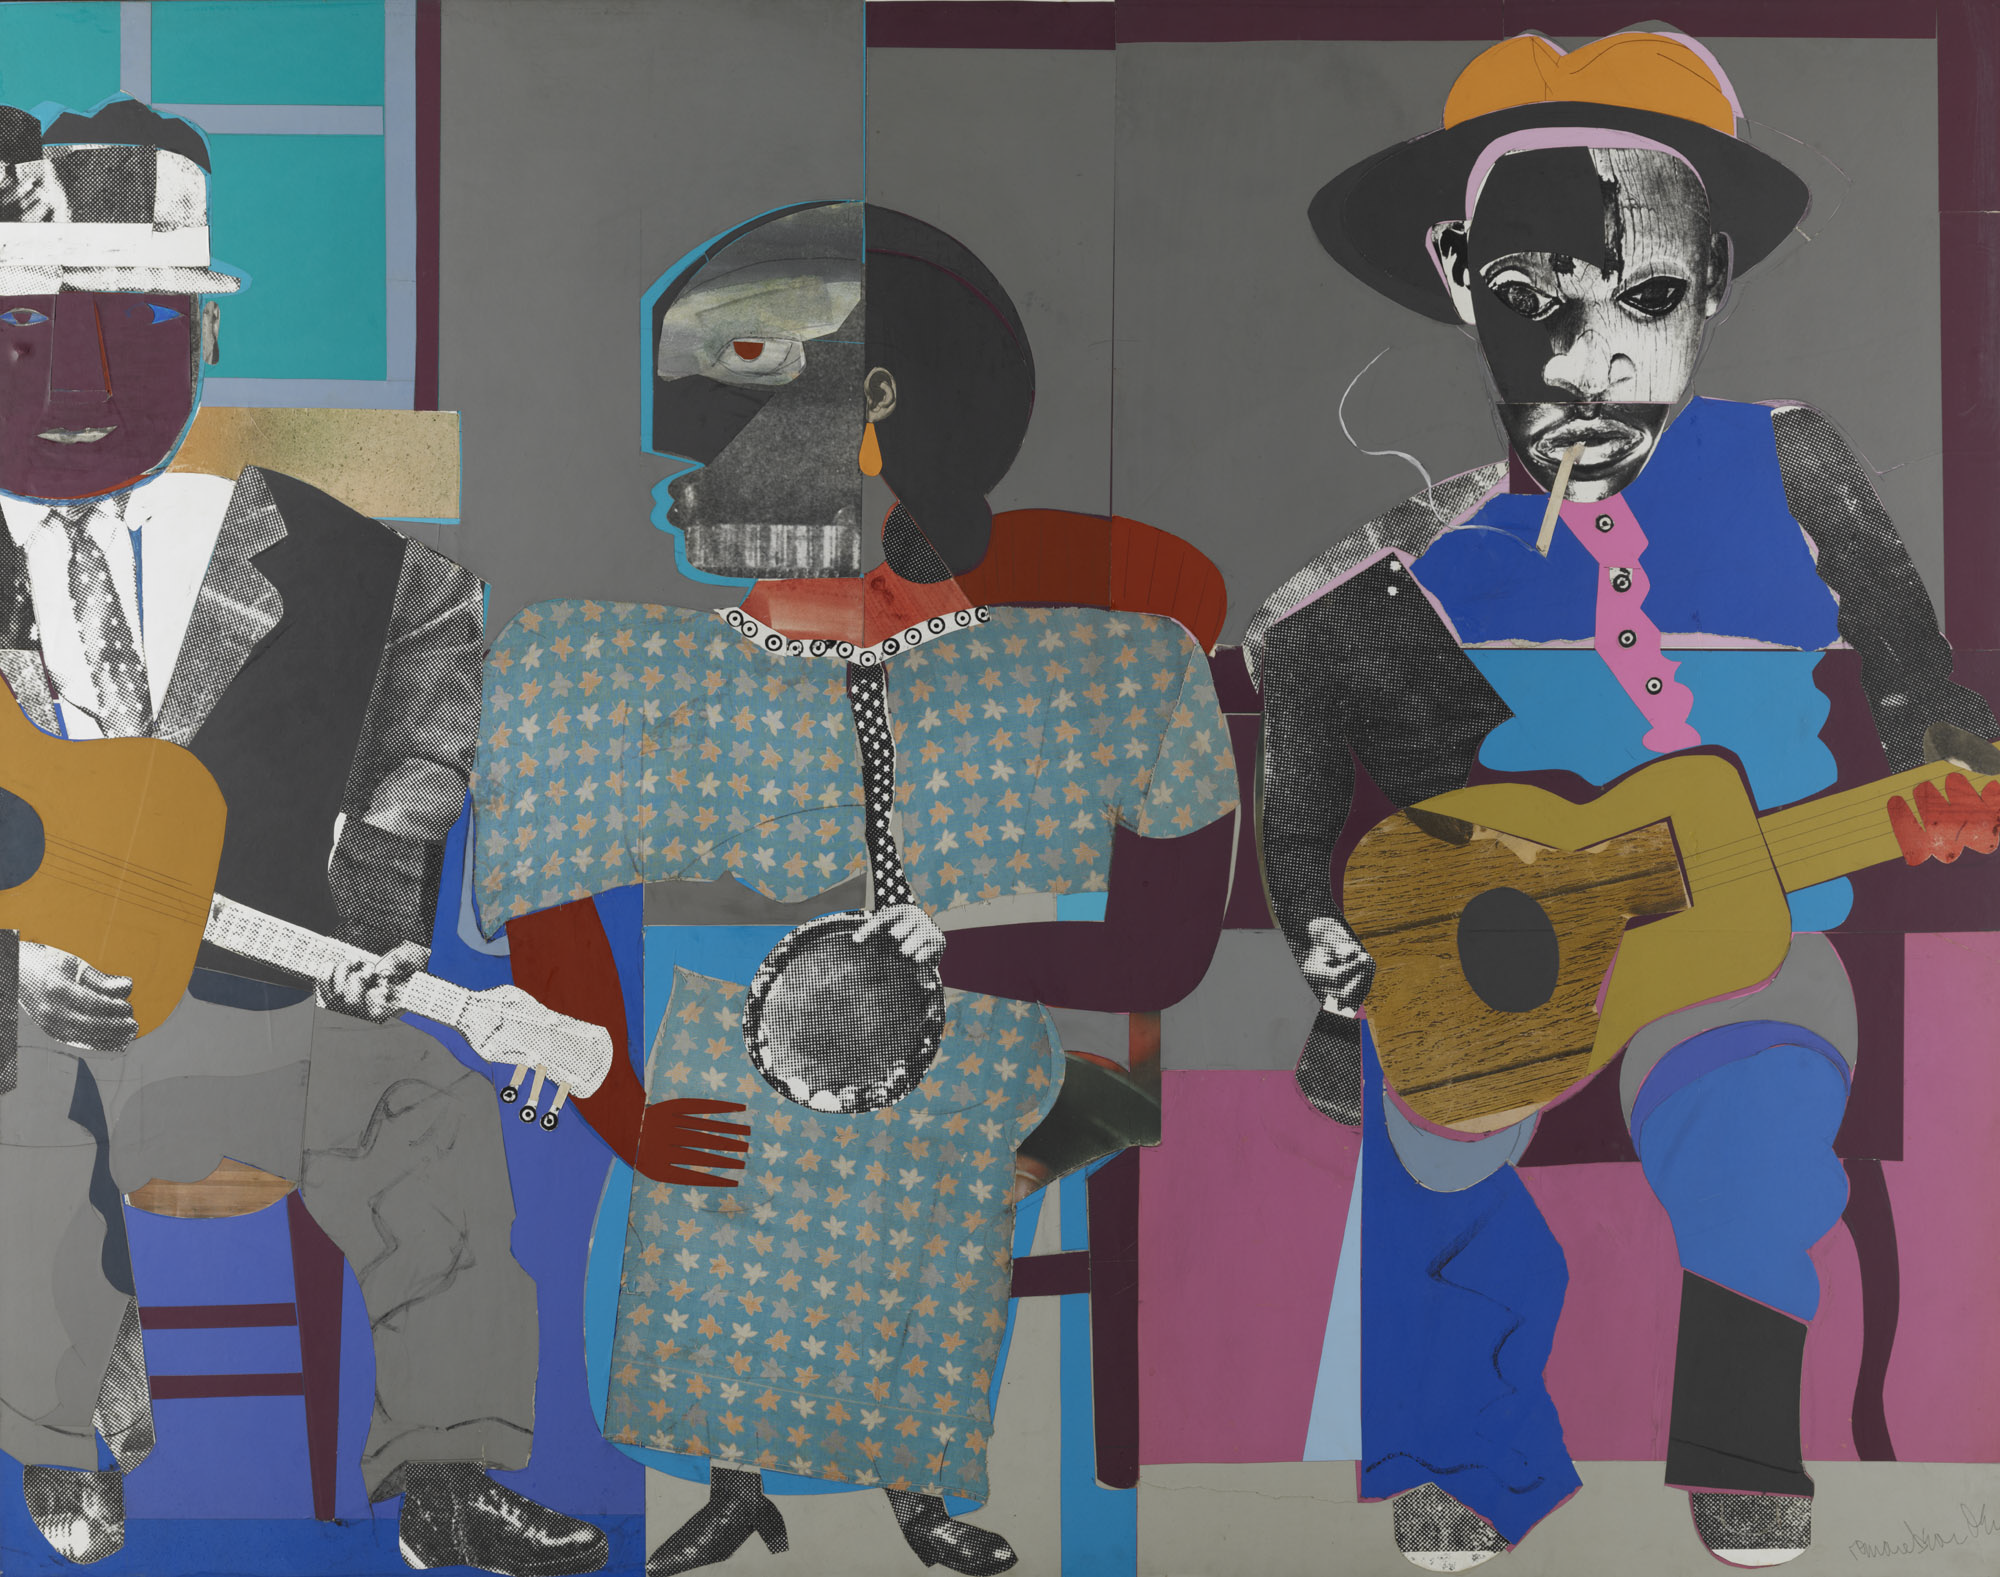 Soul Three, Romare Bearden, 1968, paper and fabric collage on board, Dallas Museum of Art, General Acquisitions Fund and Roberta Coke Camp Fund